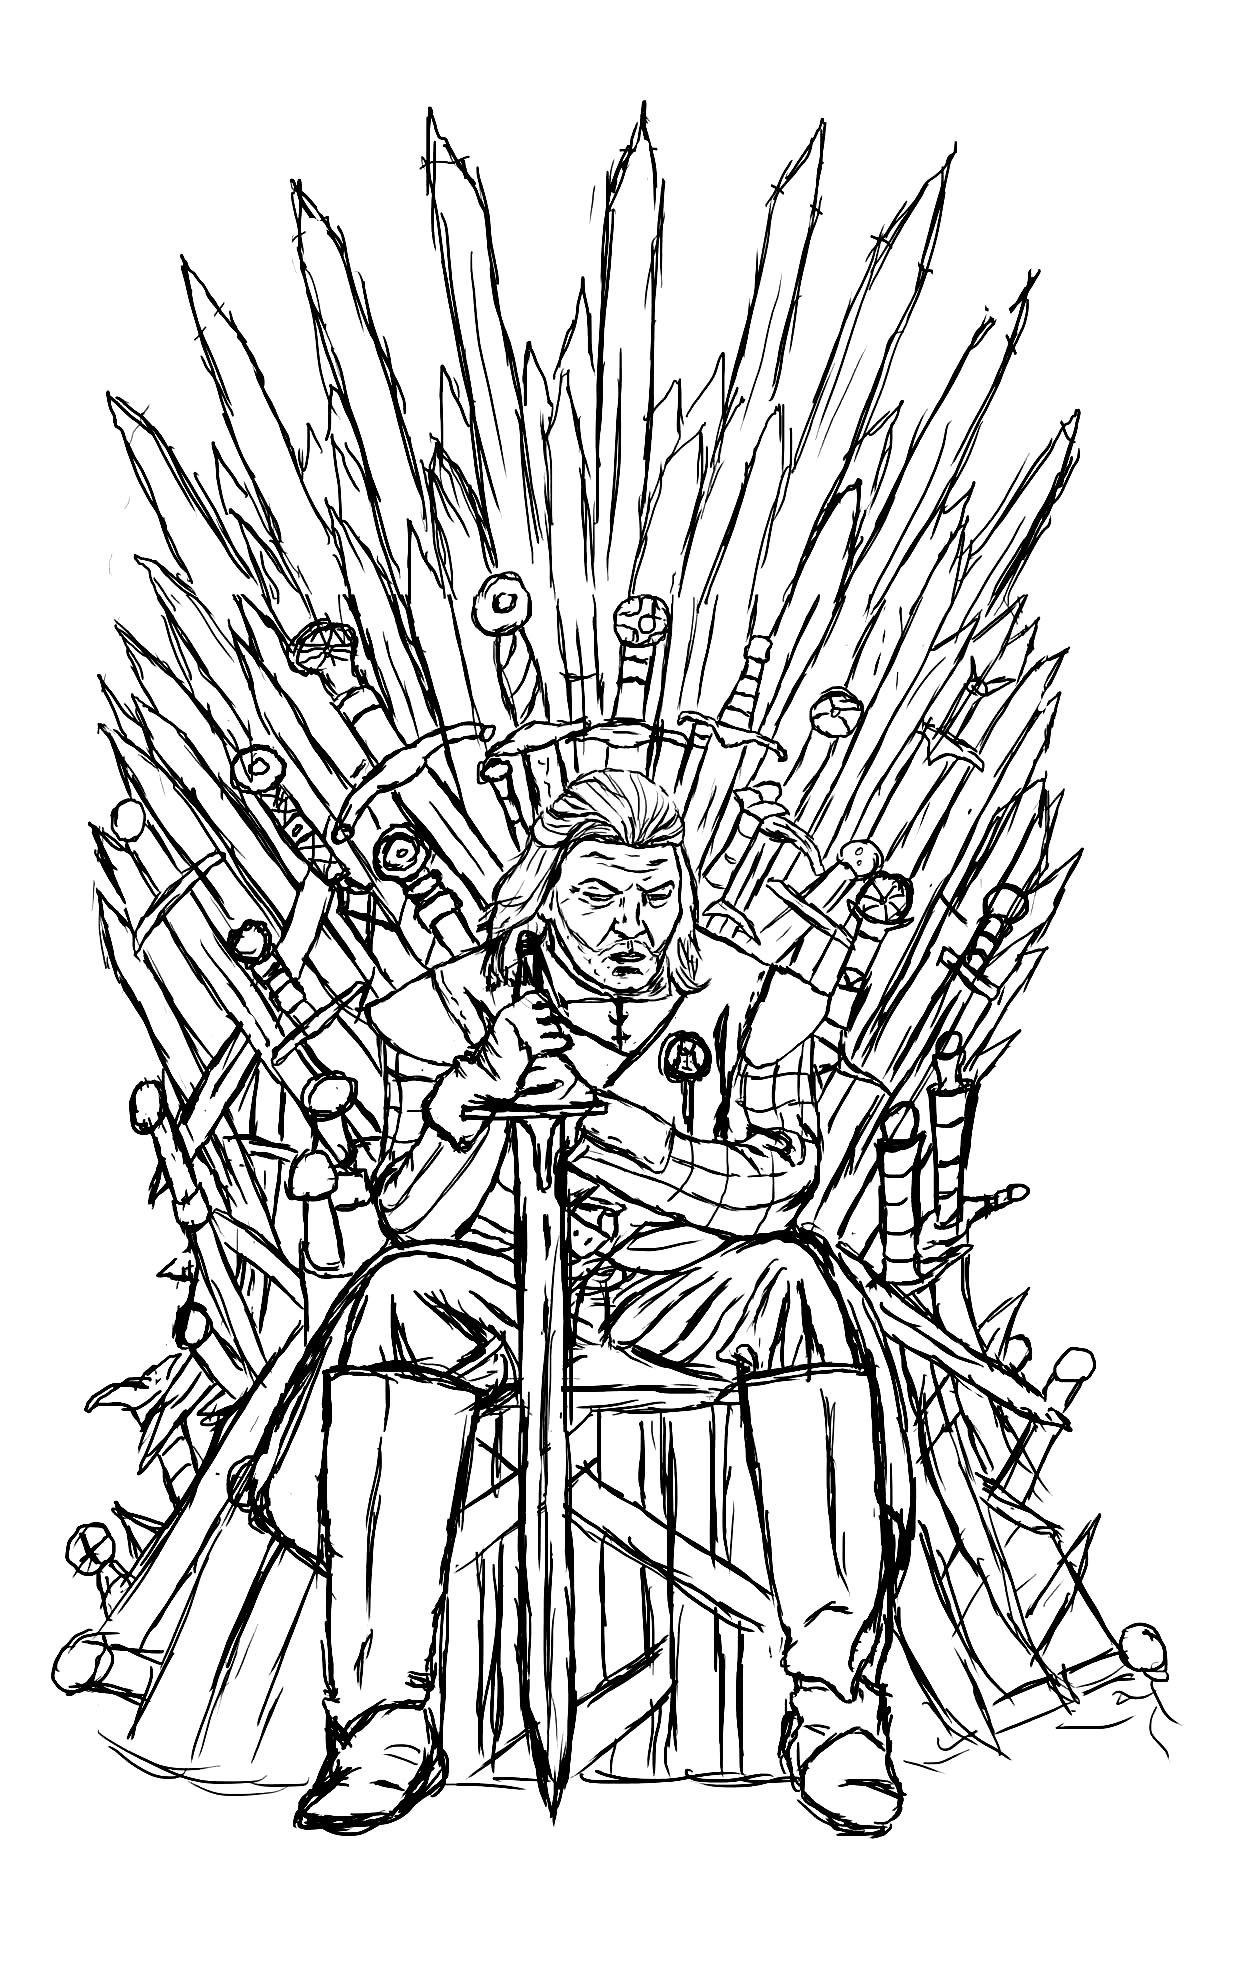 Game of throne ned starck - TV shows Adult Coloring Pages